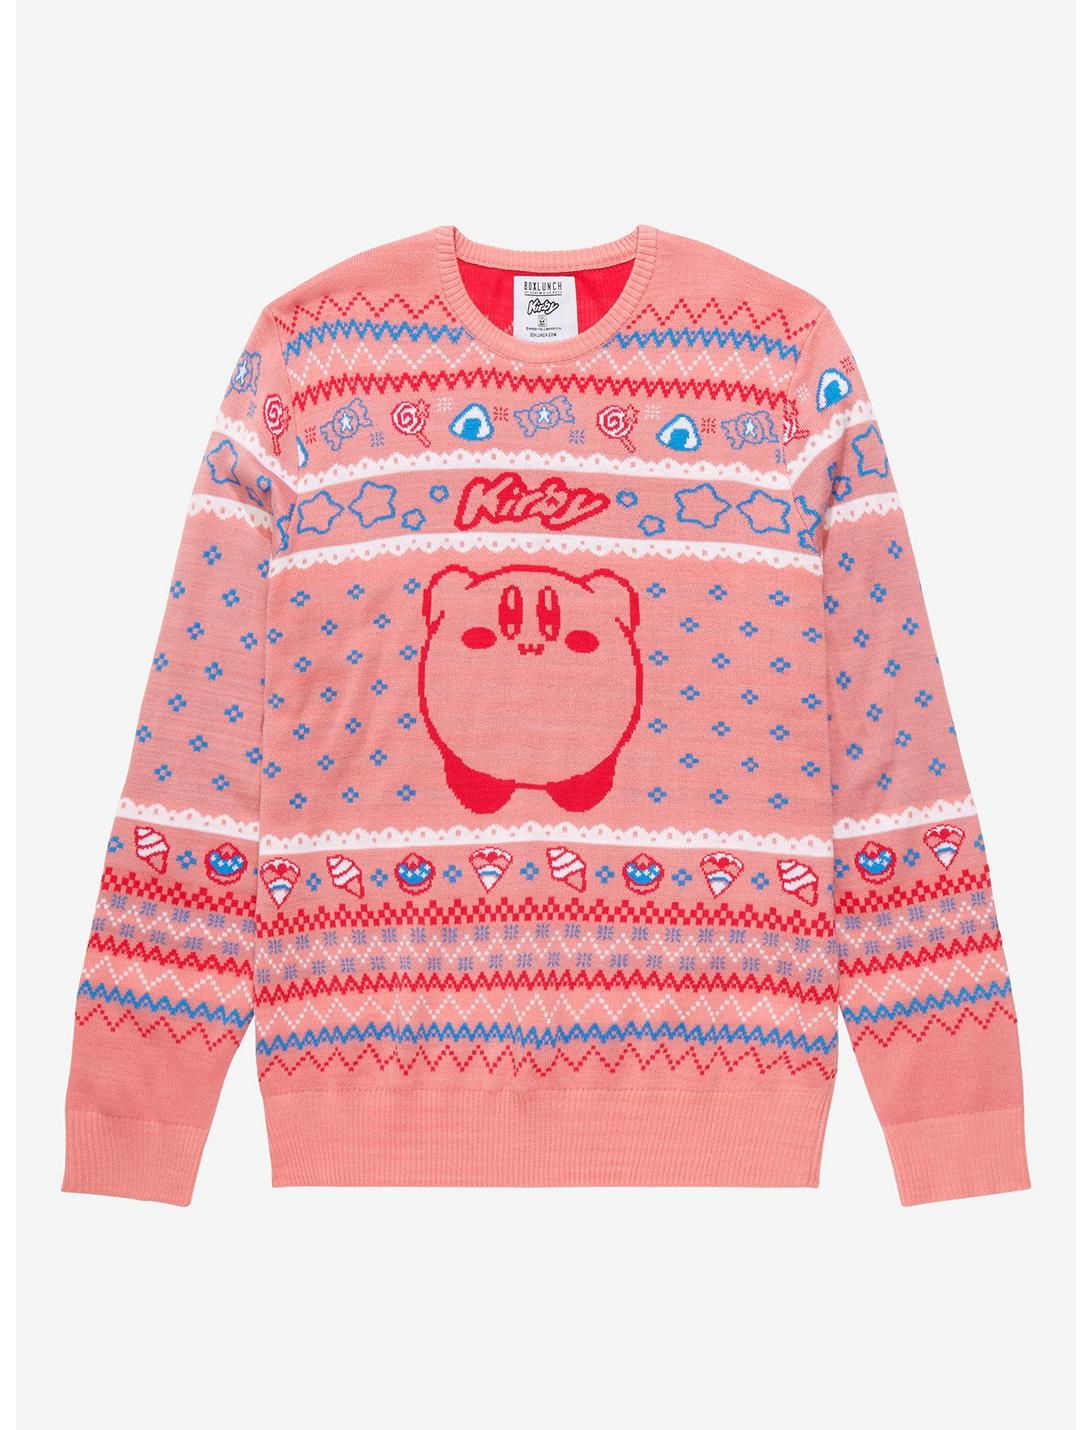 Nintendo Kirby Portrait Holiday Sweater - BoxLunch Exclusive, LIGHT PINK, hi-res